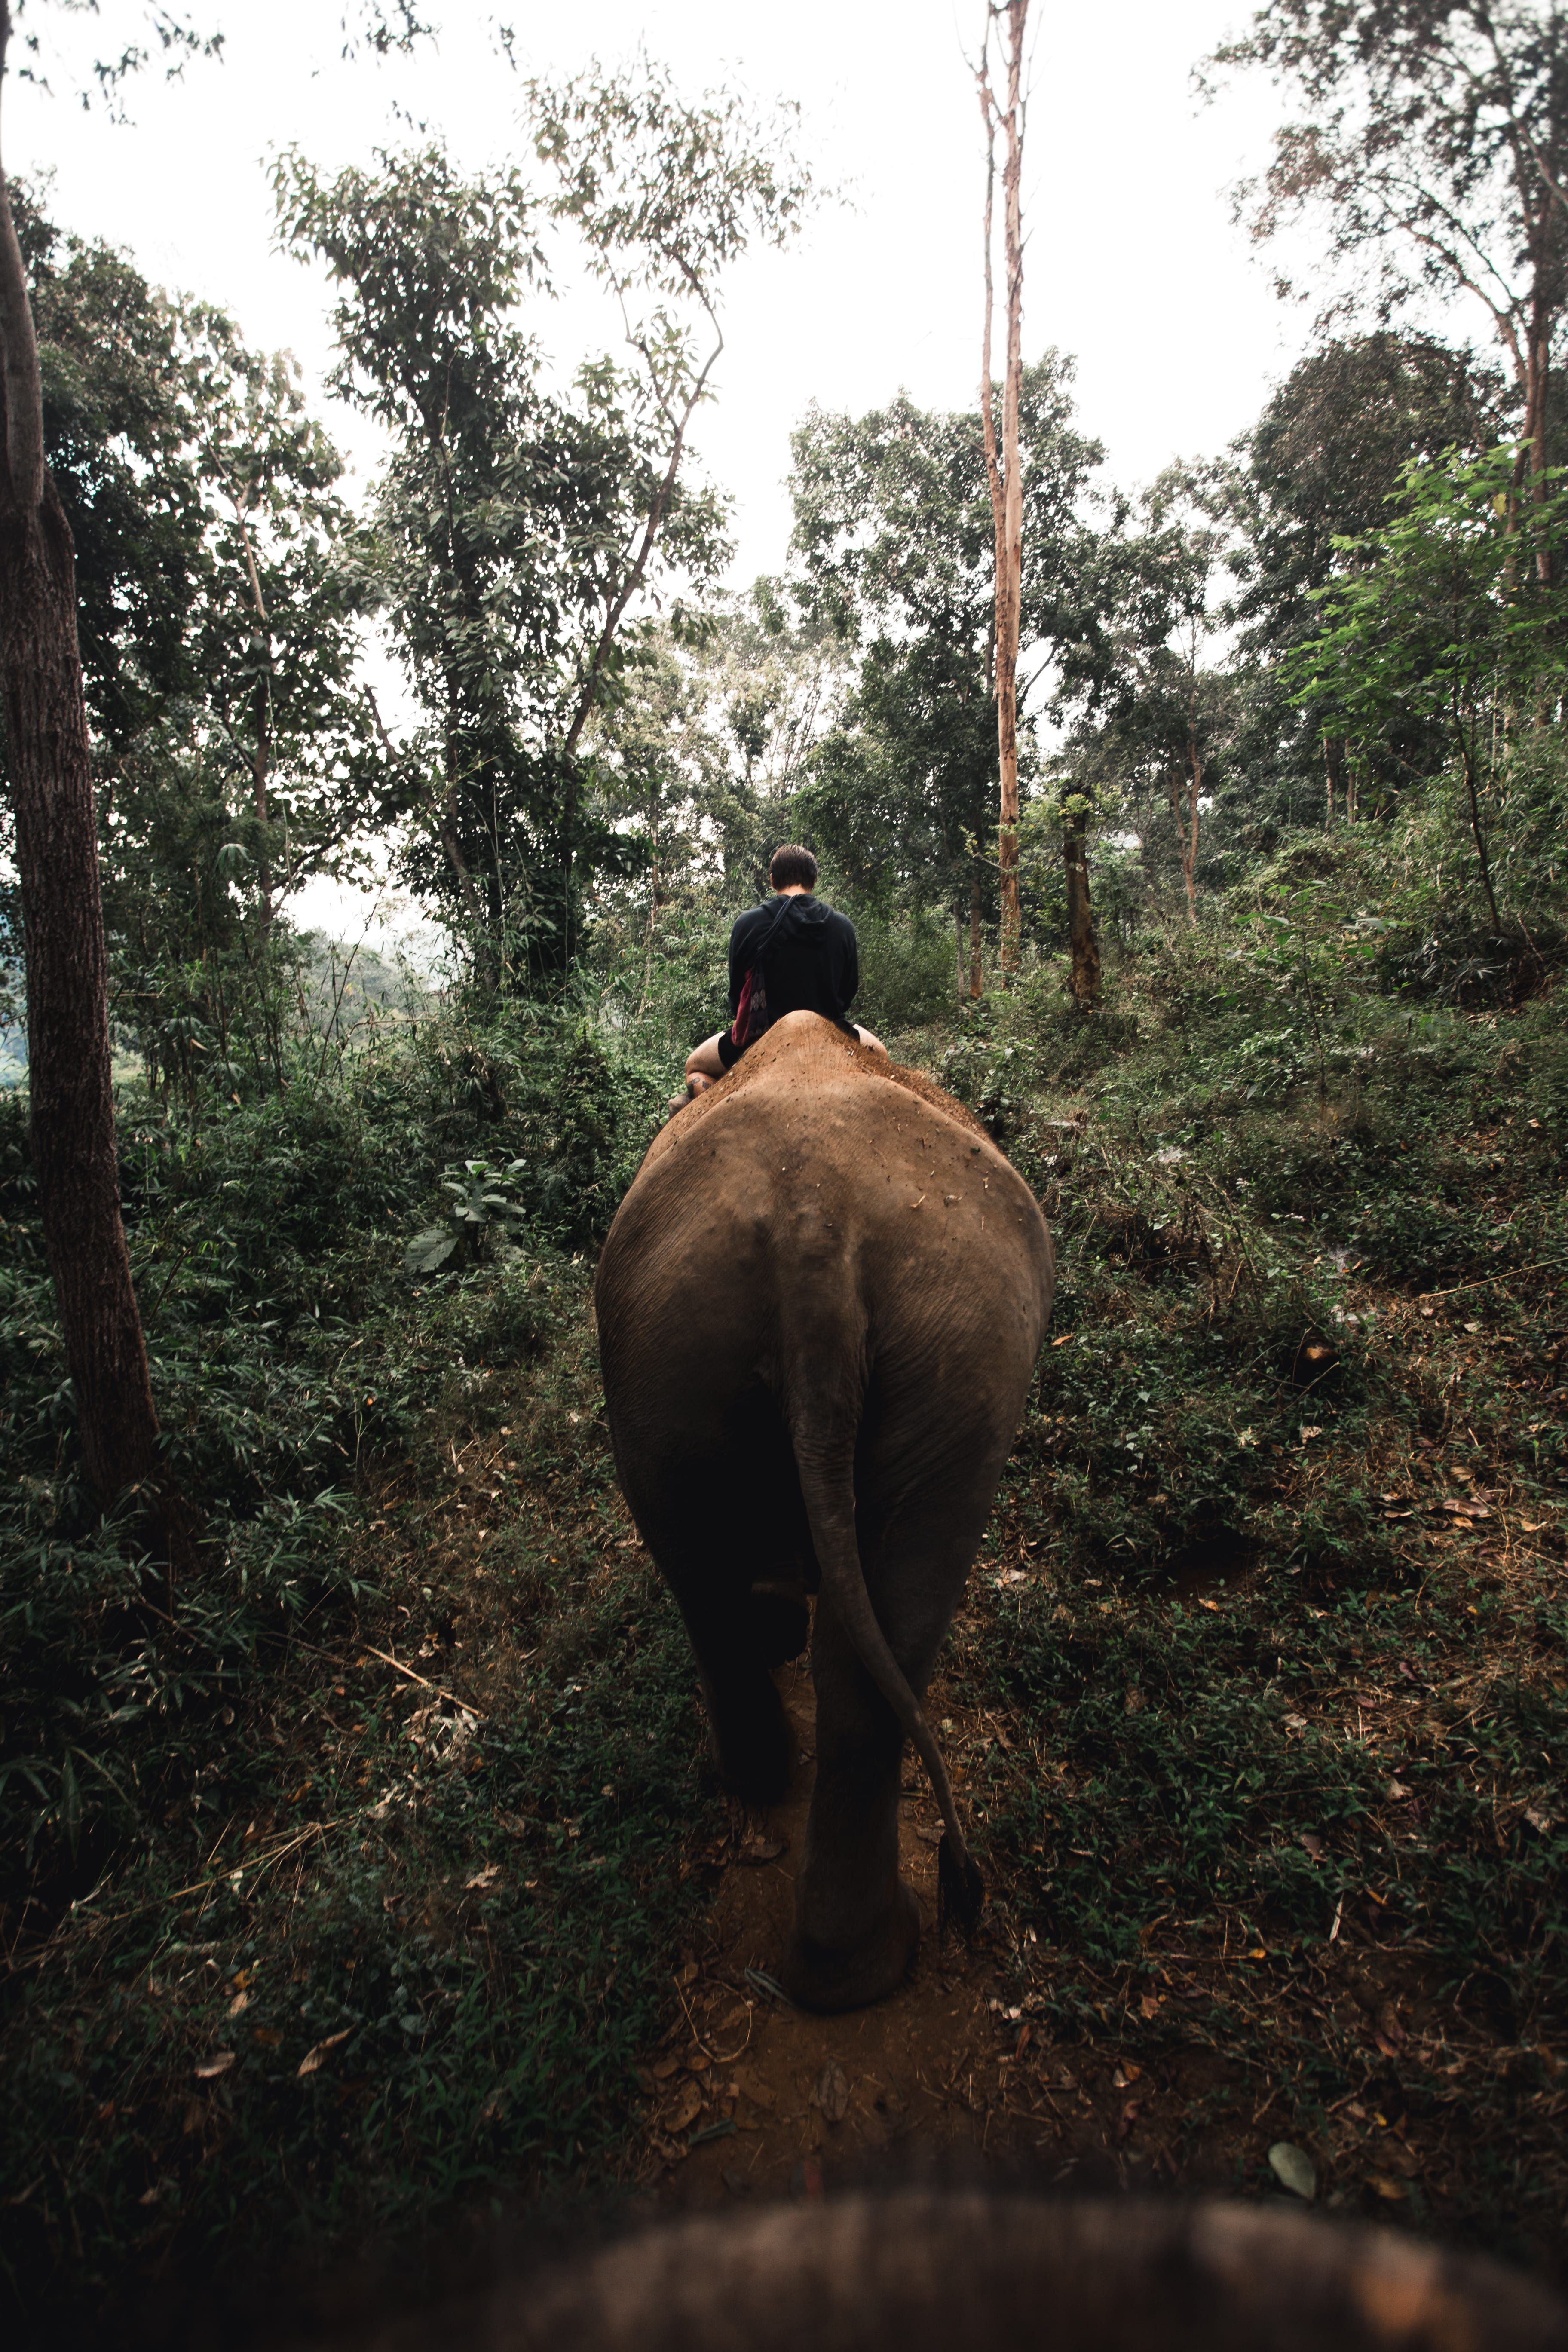 person riding elephant in woods during daytime, mammal, wildlife